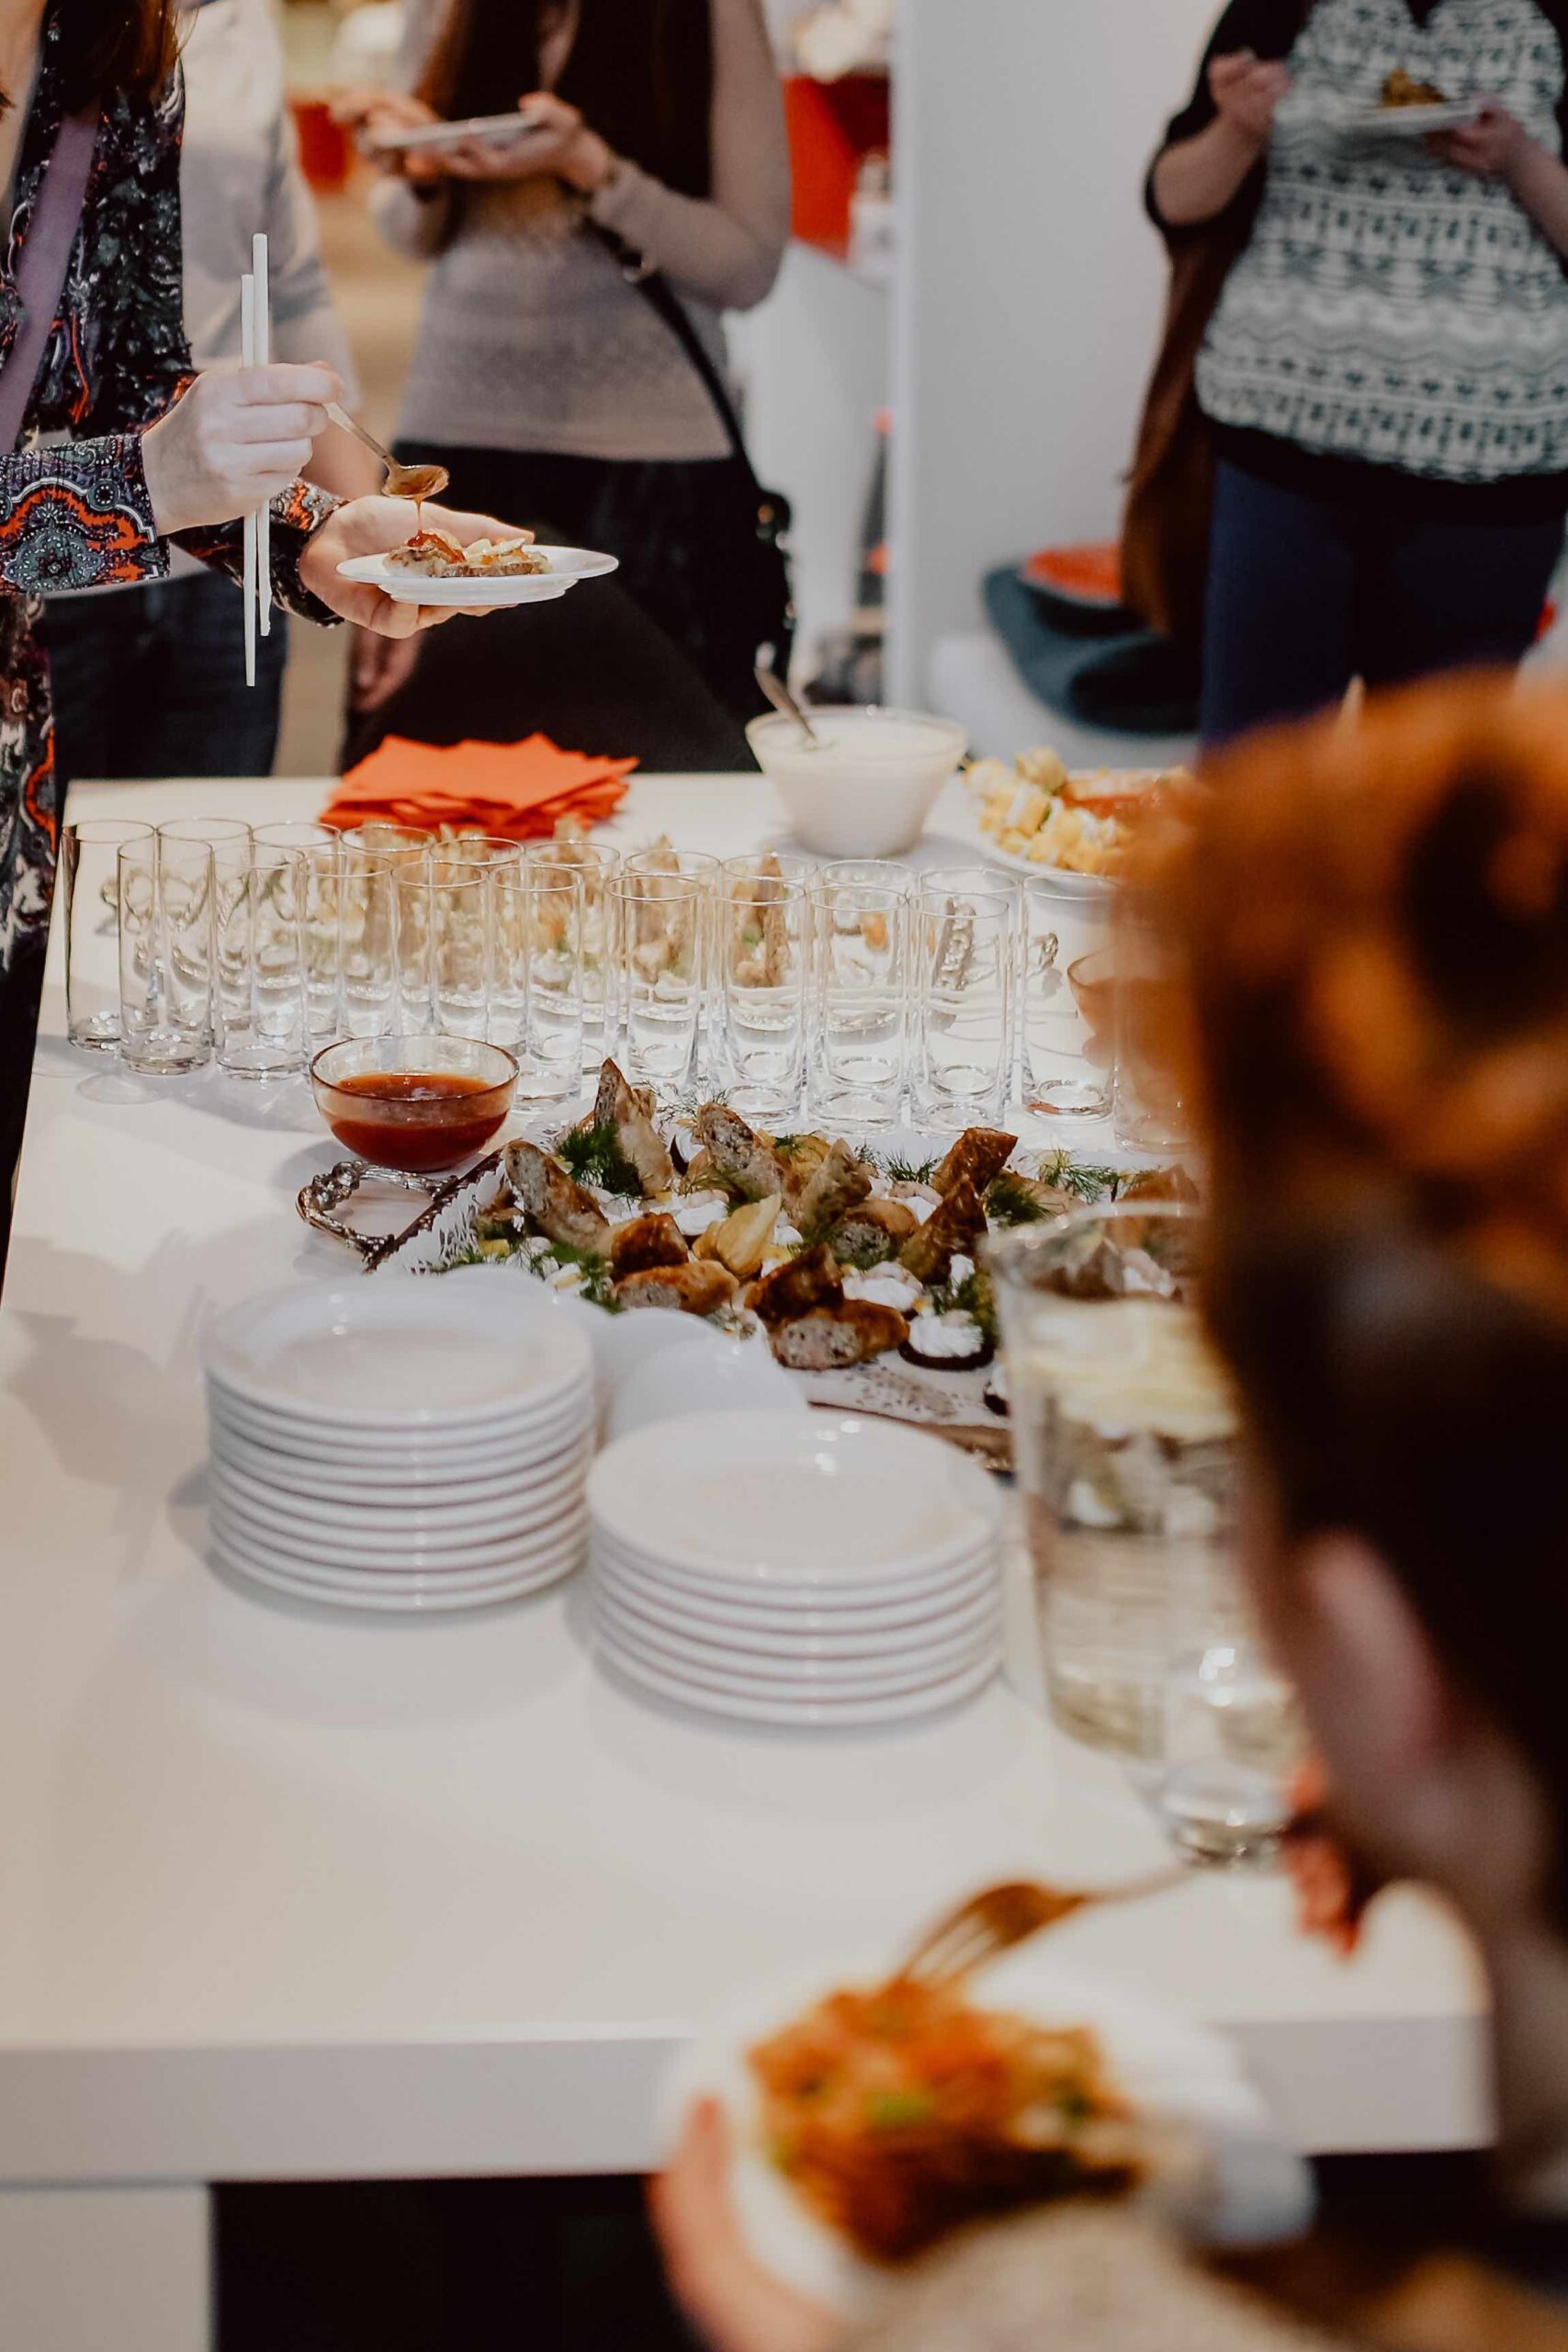 Social Anxiety and Disordered Eating [Image description: photo of a buffet table] Represents a potential buffet that a person with social anxiety and disordered eating in California faces in recovery